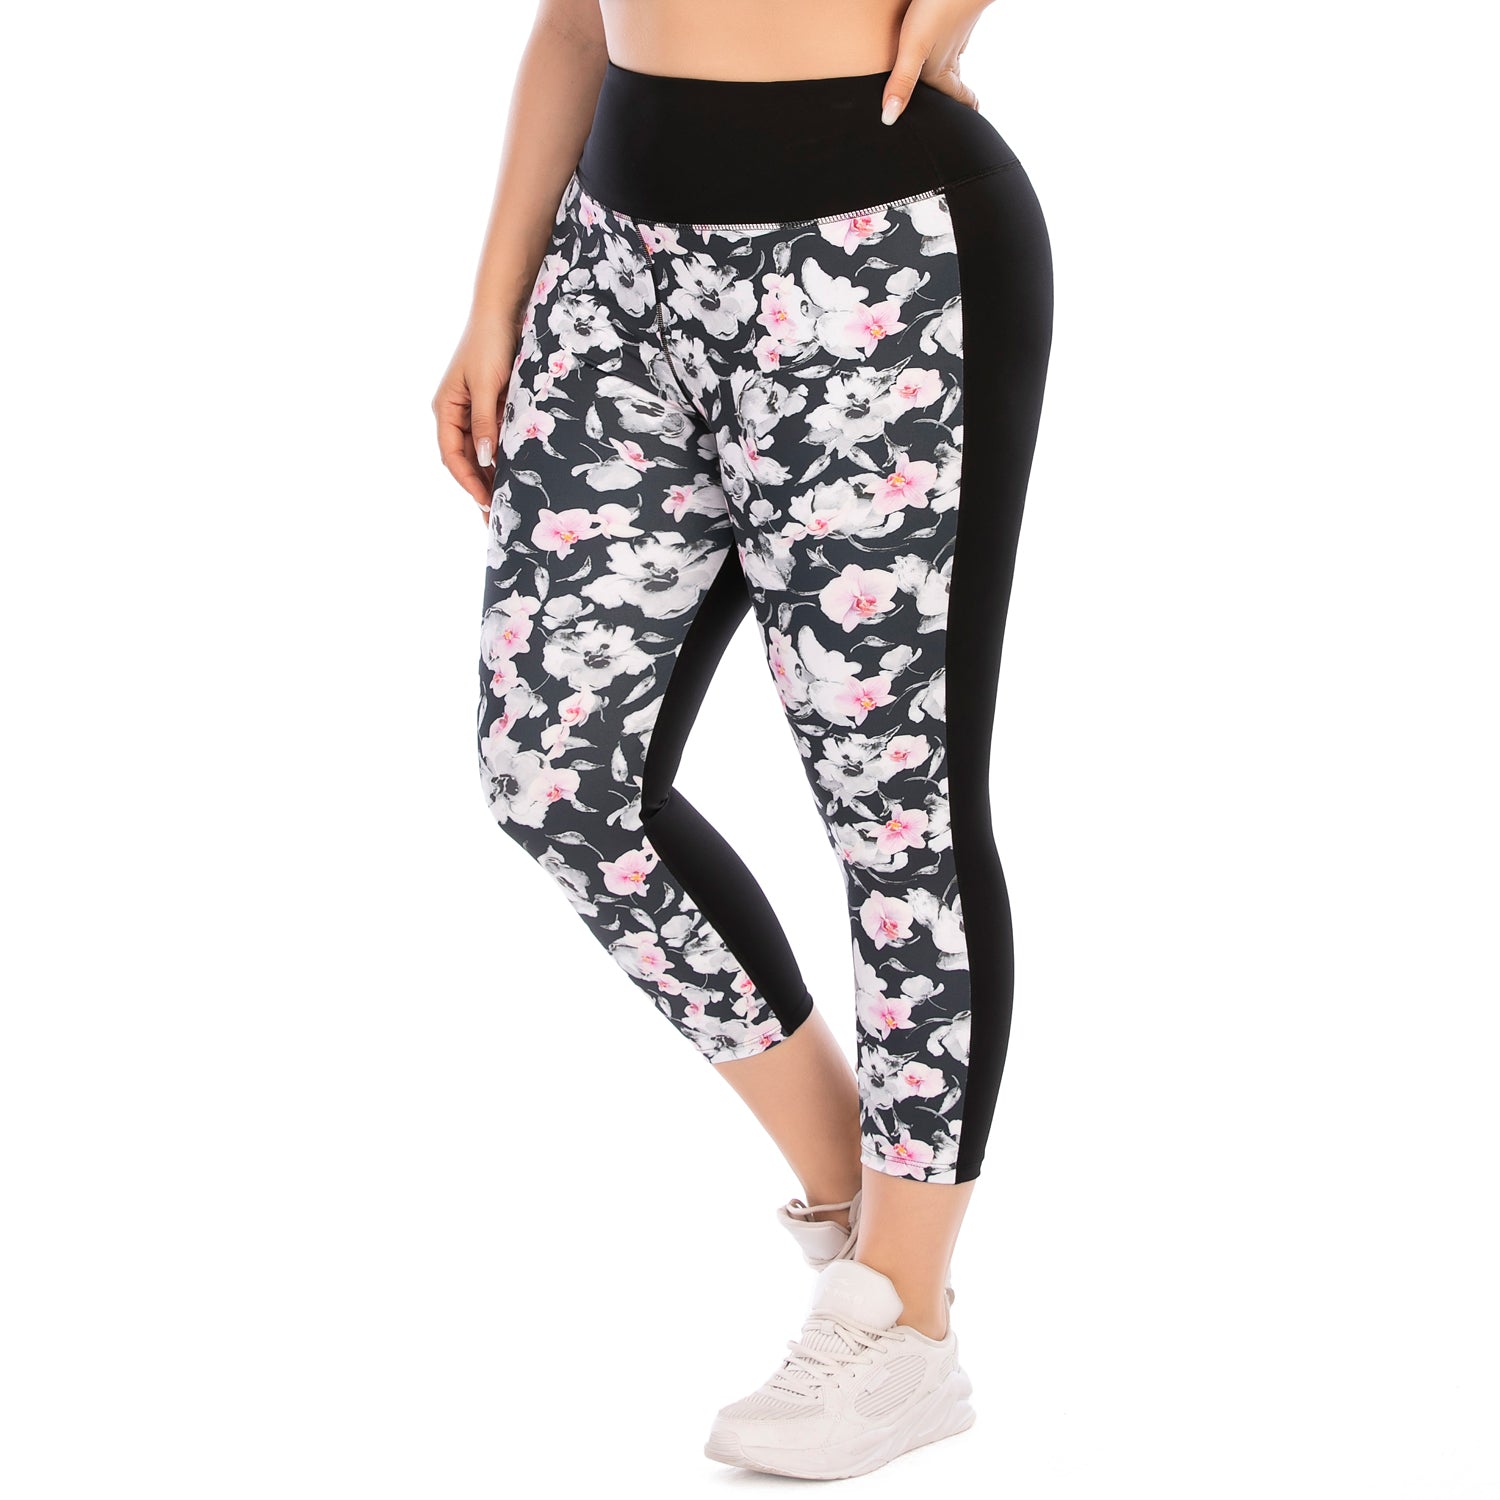 Plus Size Workout Outfits for Women Squat Proof Leggings